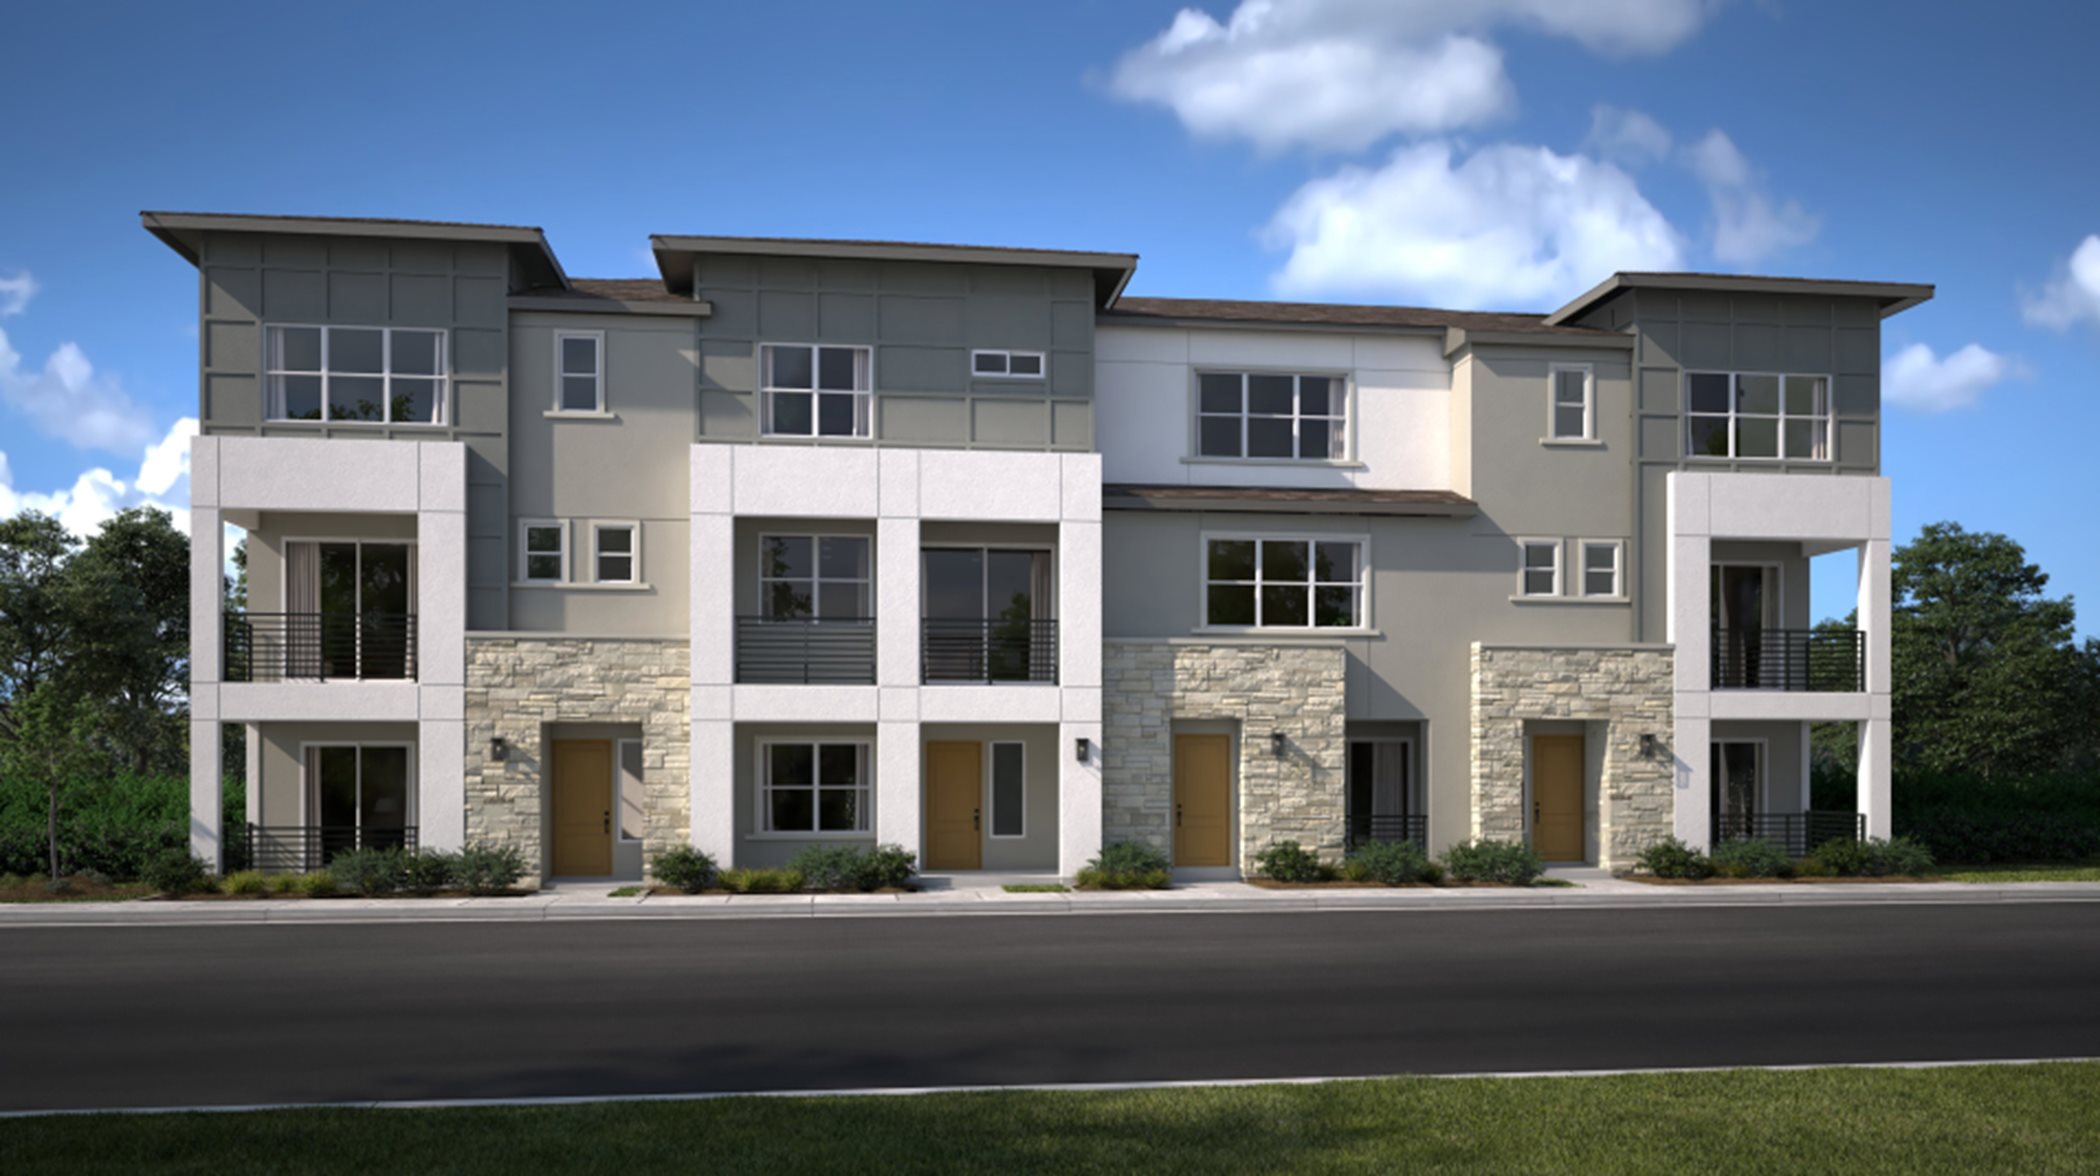 Townhome exterior